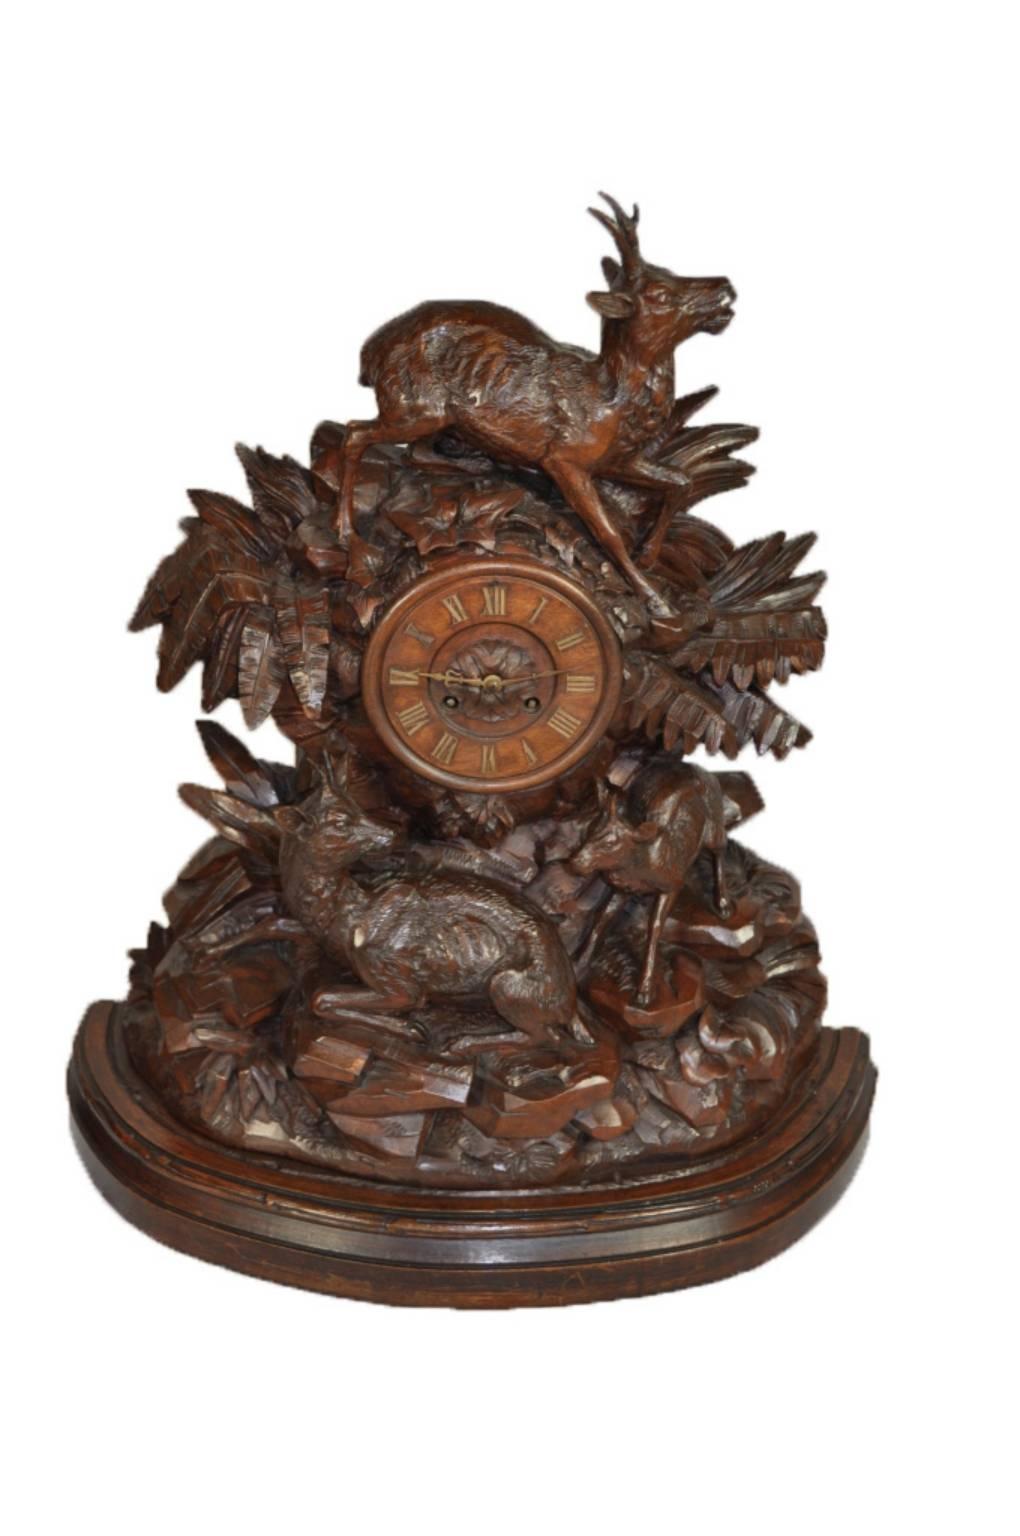 A nicely carved walnut clock featuring a family of three roe deer flanking a carved clock face with inlaid brass numerals. Two matching candelabras, each with one roe deer, hold three tapers each. The fully functioning, serviced clock comes with key